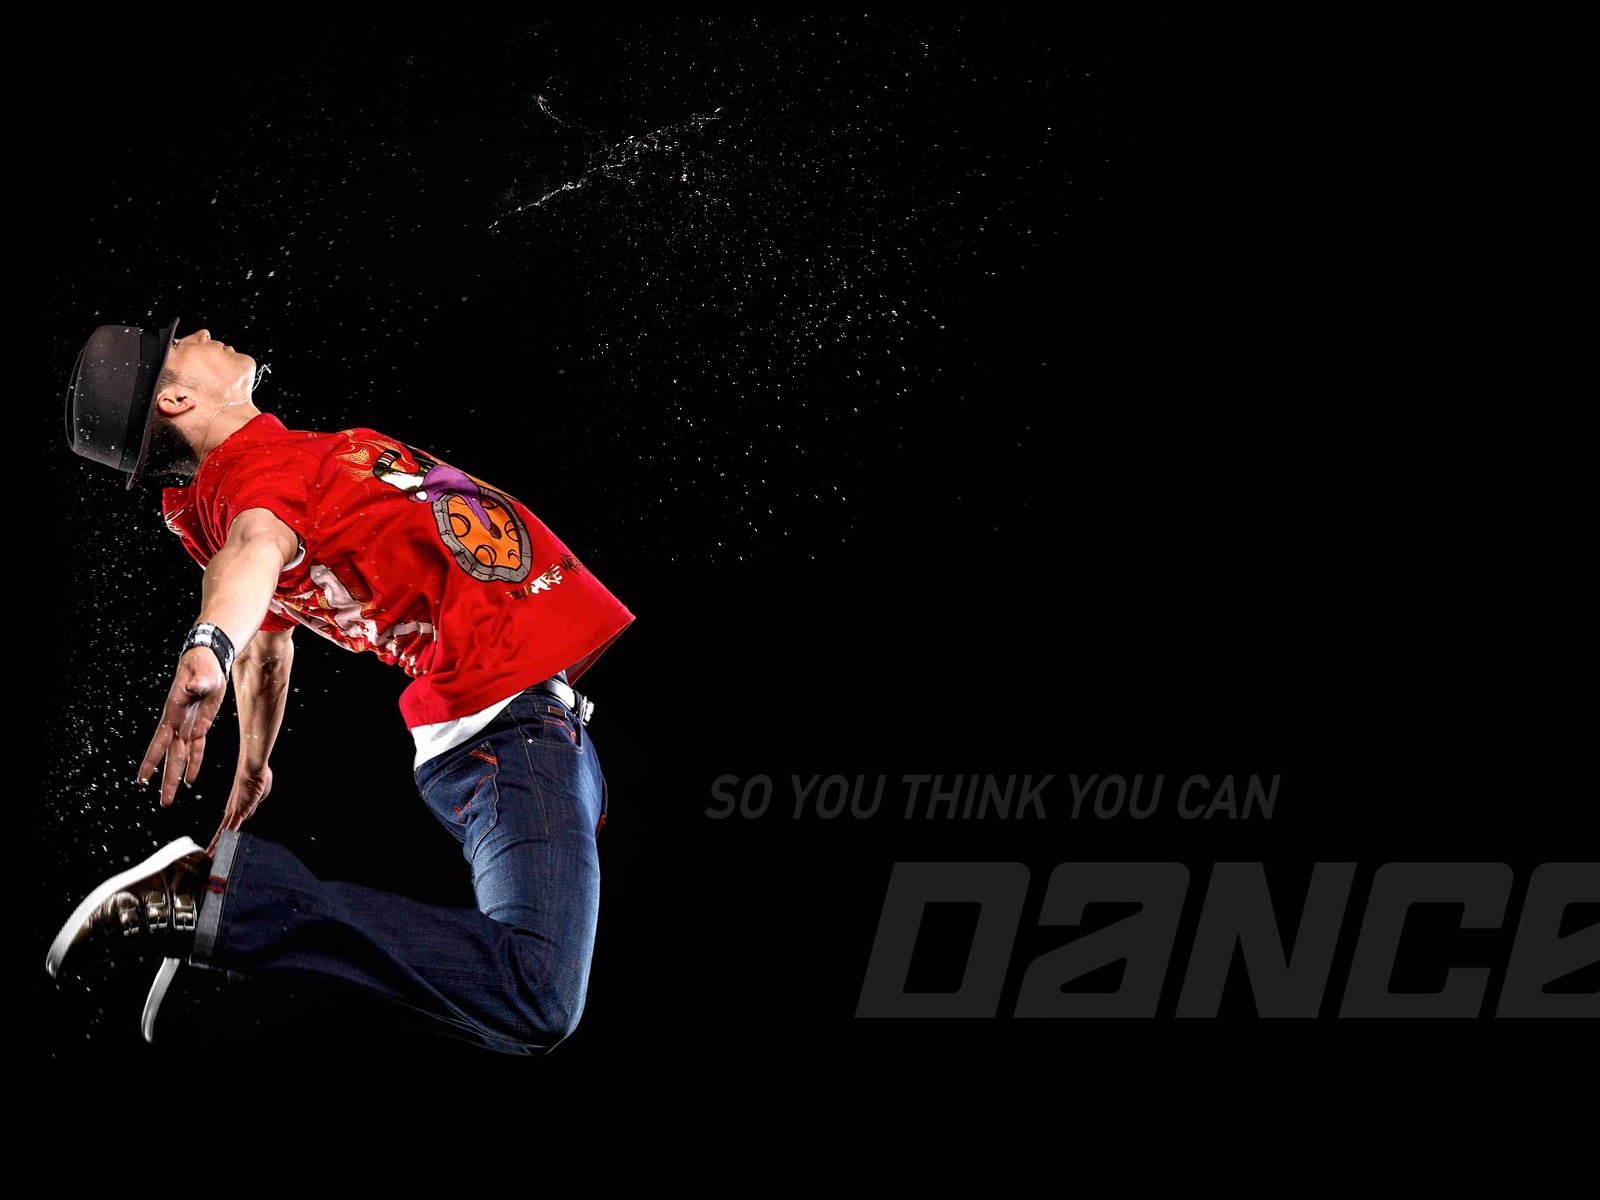 So You Think You Can Dance 舞林争霸 壁纸(一)6 - 1600x1200